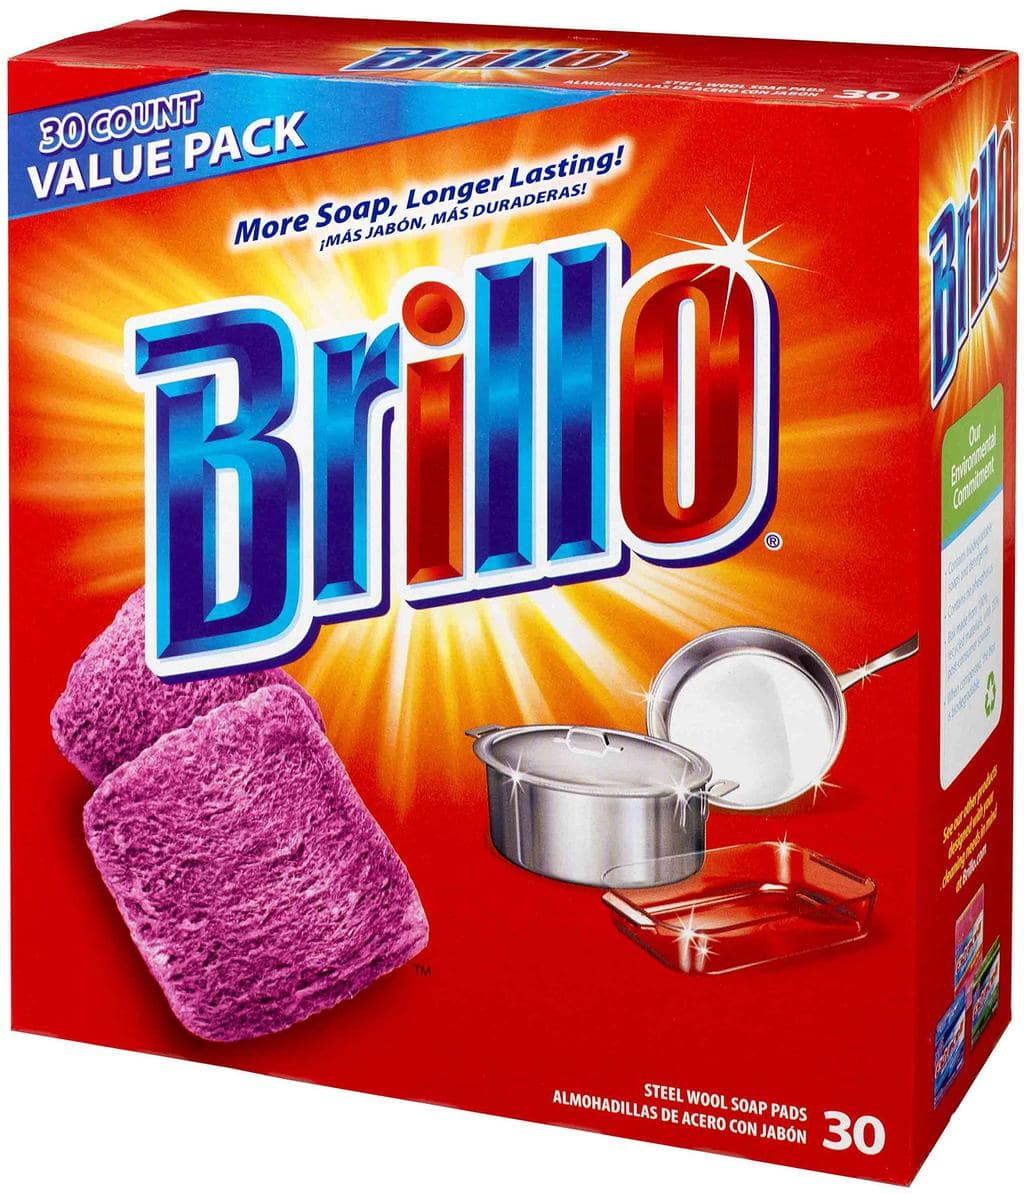 How To Use Brillo Pads To Keep Mice Away (And Why It Works)